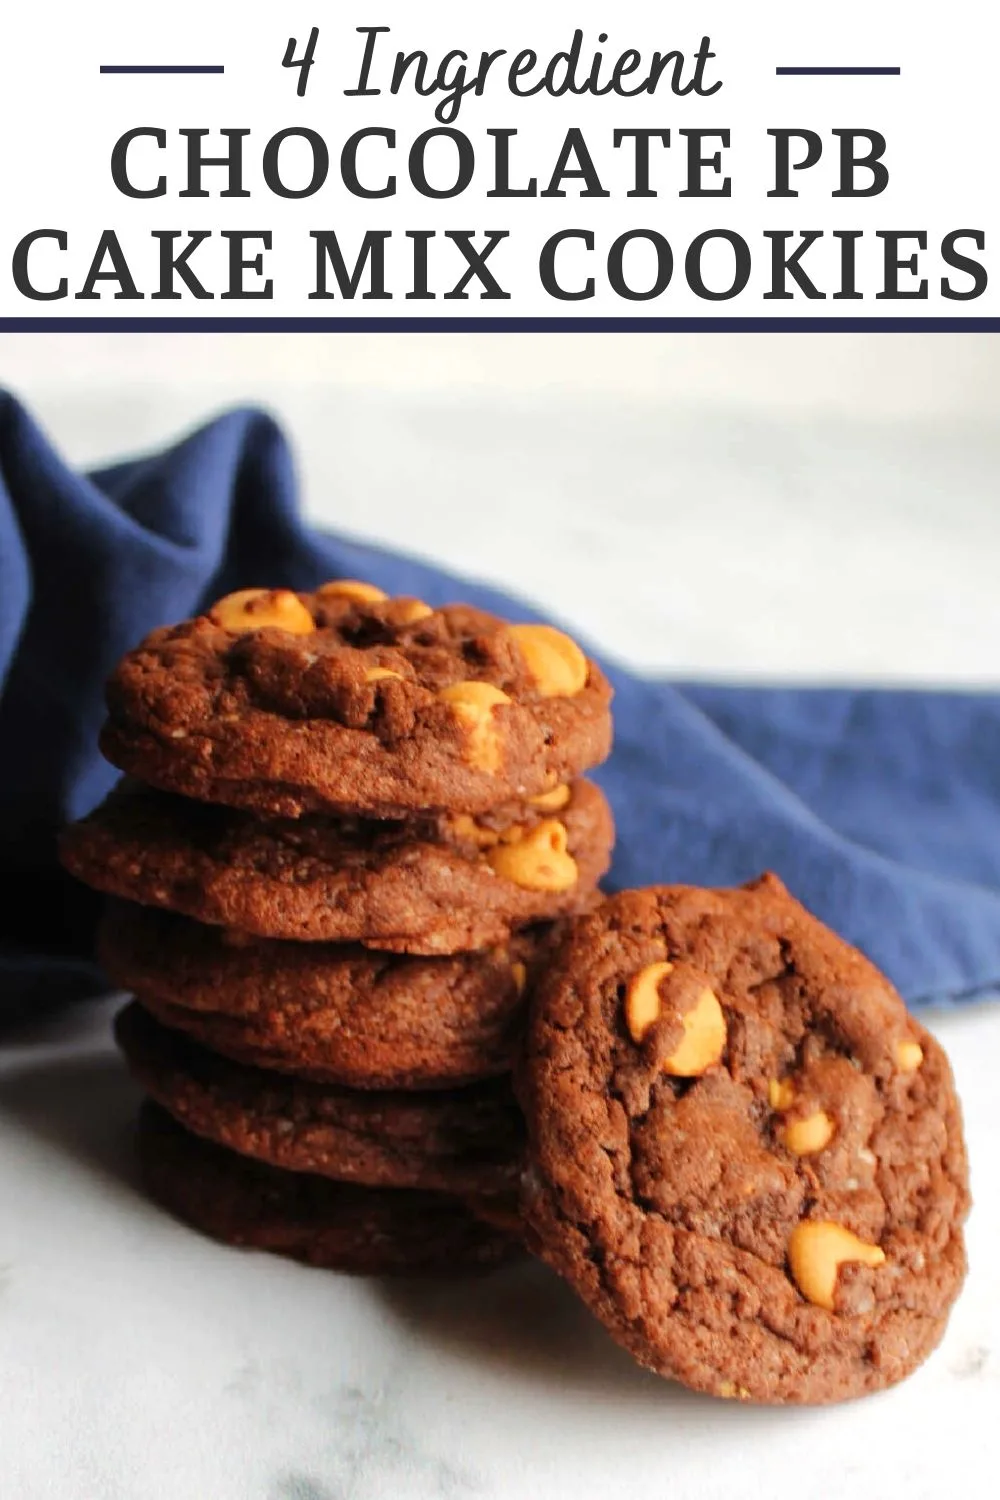 Peanut butter chocolate cake mix cookies are the perfect way to make a sweet treat in a hurry. They only take 4 simple ingredients and a few minutes to put together, but that can be out little secret. Everyone else can think you worked hard baking up a delicious dessert.